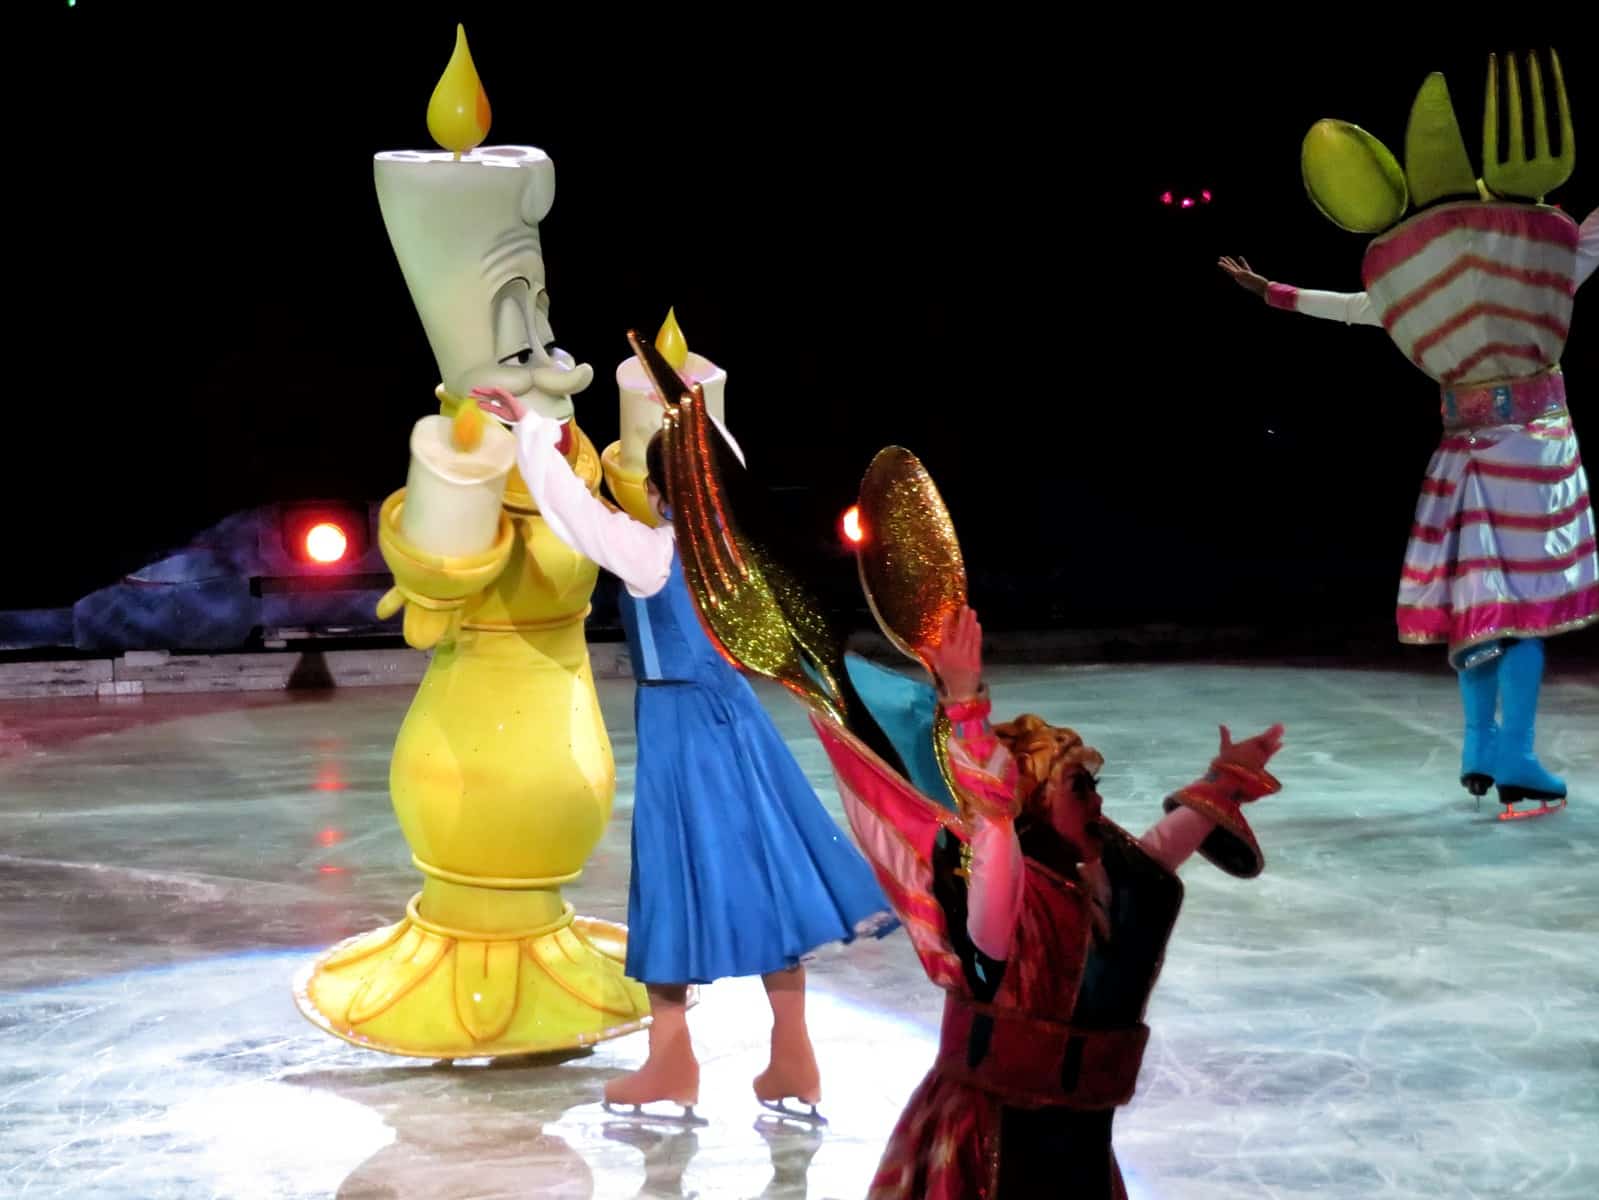 Disney on Ice Beauty and the Beast